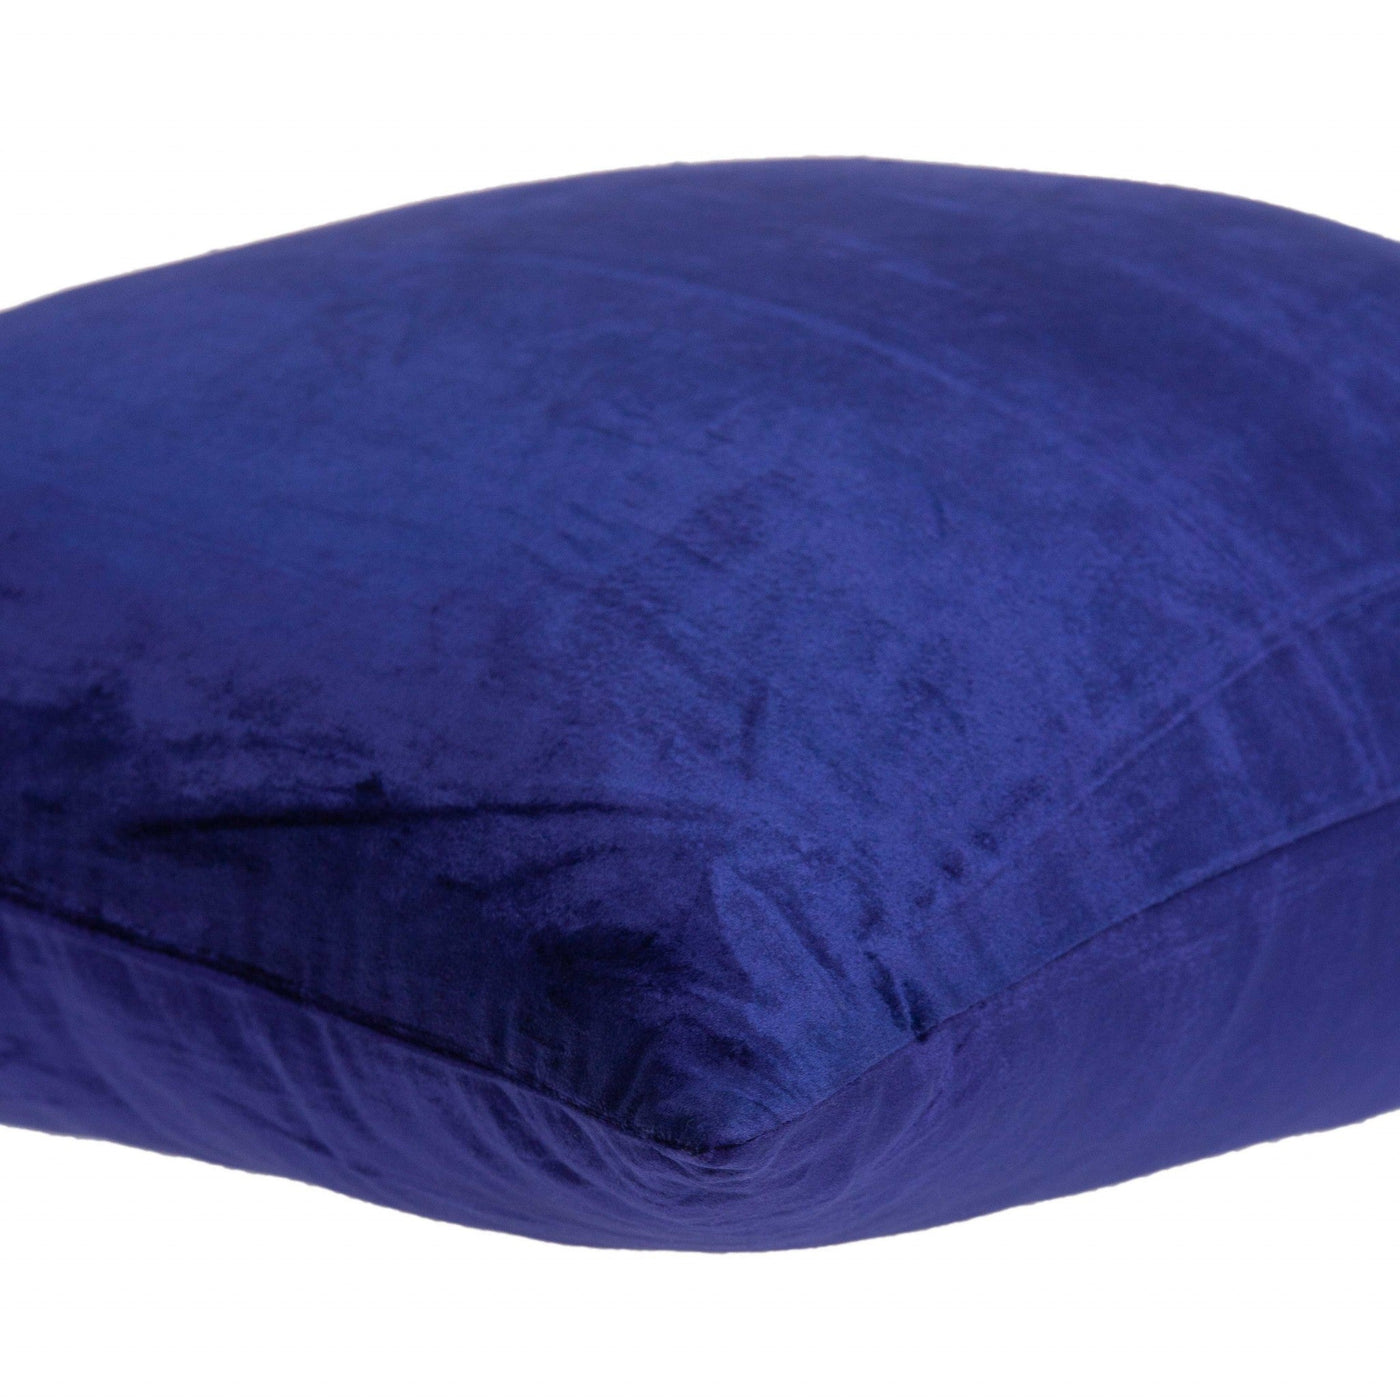 22’ X 7’ X 22’ Transitional Royal Blue Solid Pillow Cover With Poly Insert - Accent Throw Pillows